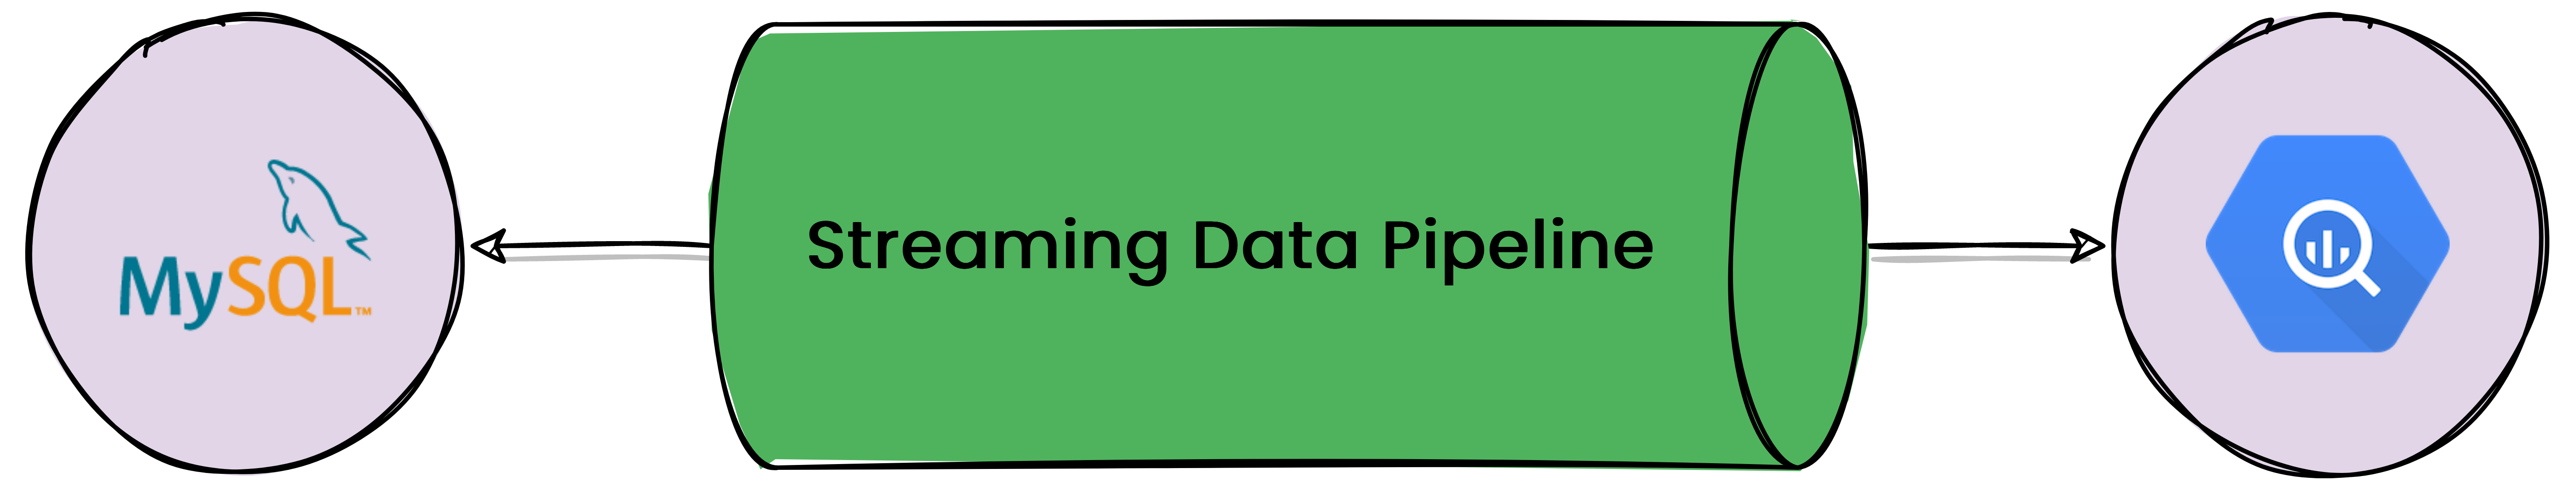 A streaming data pipeline.